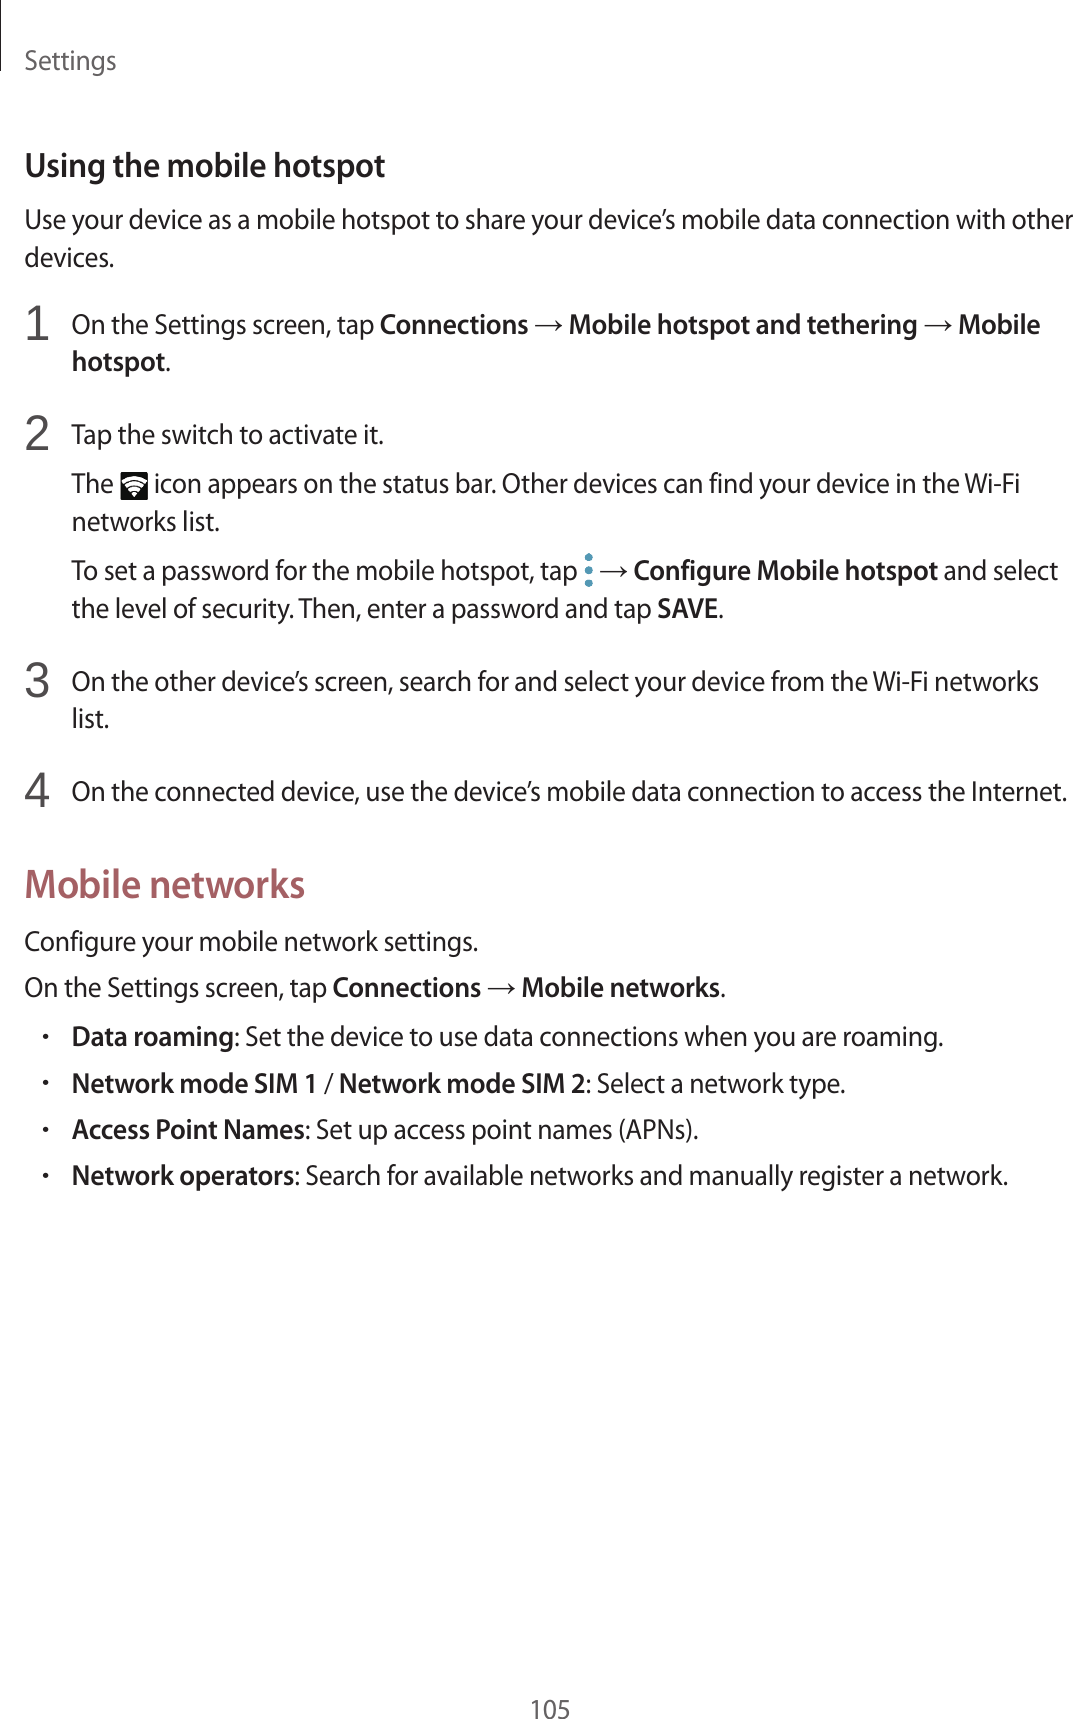 Settings105Using the mobile hotspotUse your device as a mobile hotspot to share your device’s mobile data connection with other devices.1  On the Settings screen, tap Connections → Mobile hotspot and tethering → Mobile hotspot.2  Tap the switch to activate it.The   icon appears on the status bar. Other devices can find your device in the Wi-Fi networks list.To set a password for the mobile hotspot, tap   → Configure Mobile hotspot and select the level of security. Then, enter a password and tap SAVE.3  On the other device’s screen, search for and select your device from the Wi-Fi networks list.4  On the connected device, use the device’s mobile data connection to access the Internet.Mobile networksConfigure your mobile network settings.On the Settings screen, tap Connections → Mobile networks.•Data roaming: Set the device to use data connections when you are roaming.•Network mode SIM 1 / Network mode SIM 2: Select a network type.•Access Point Names: Set up access point names (APNs).•Network operators: Search for available networks and manually register a network.